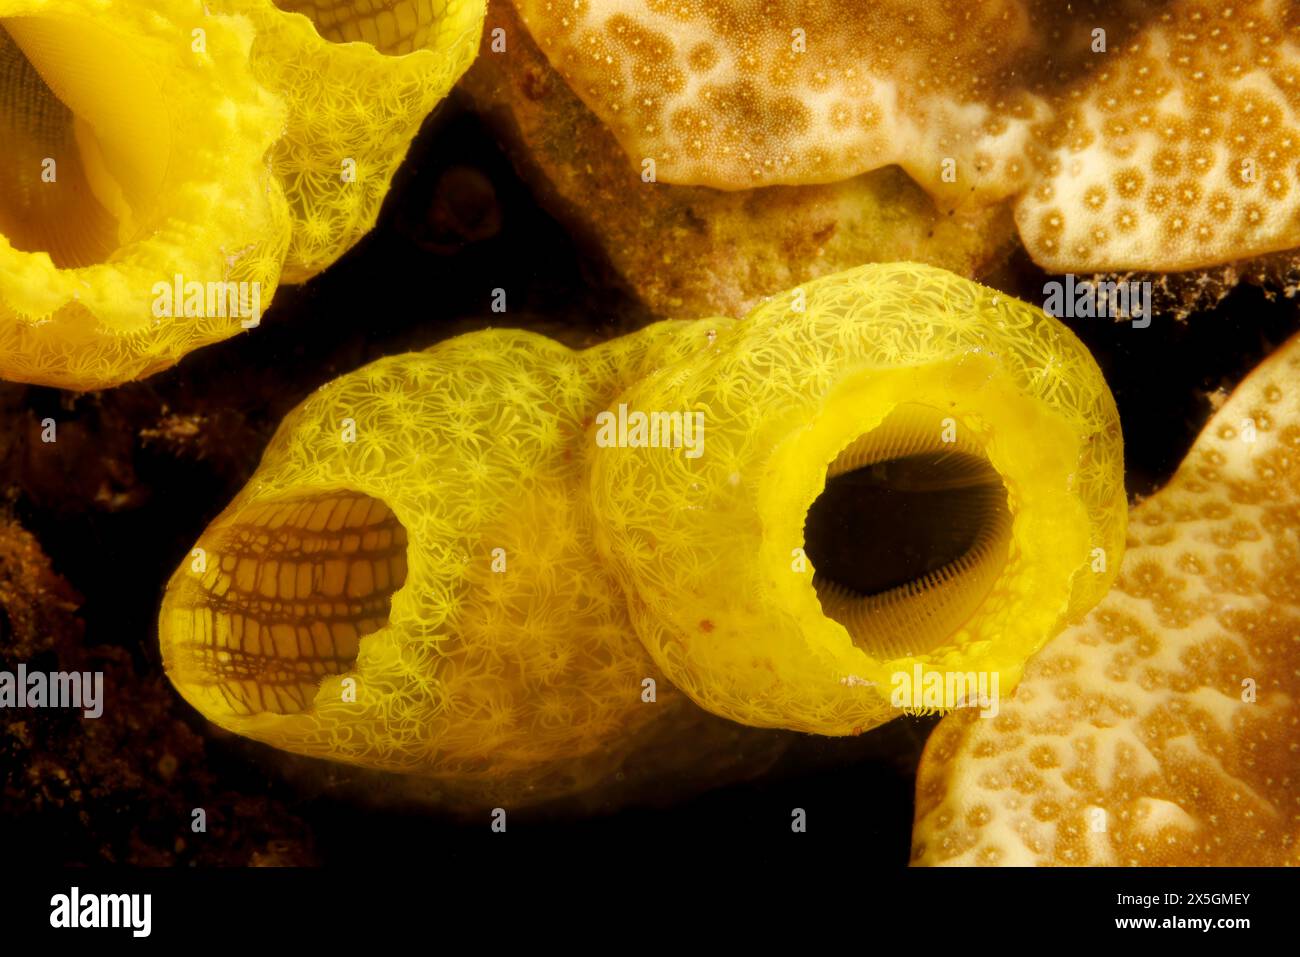 This yellow ascidian, Phallusia julinea, is also known as a tunicate or sea squirt, Guam, Federated States of Micronesia. Stock Photo